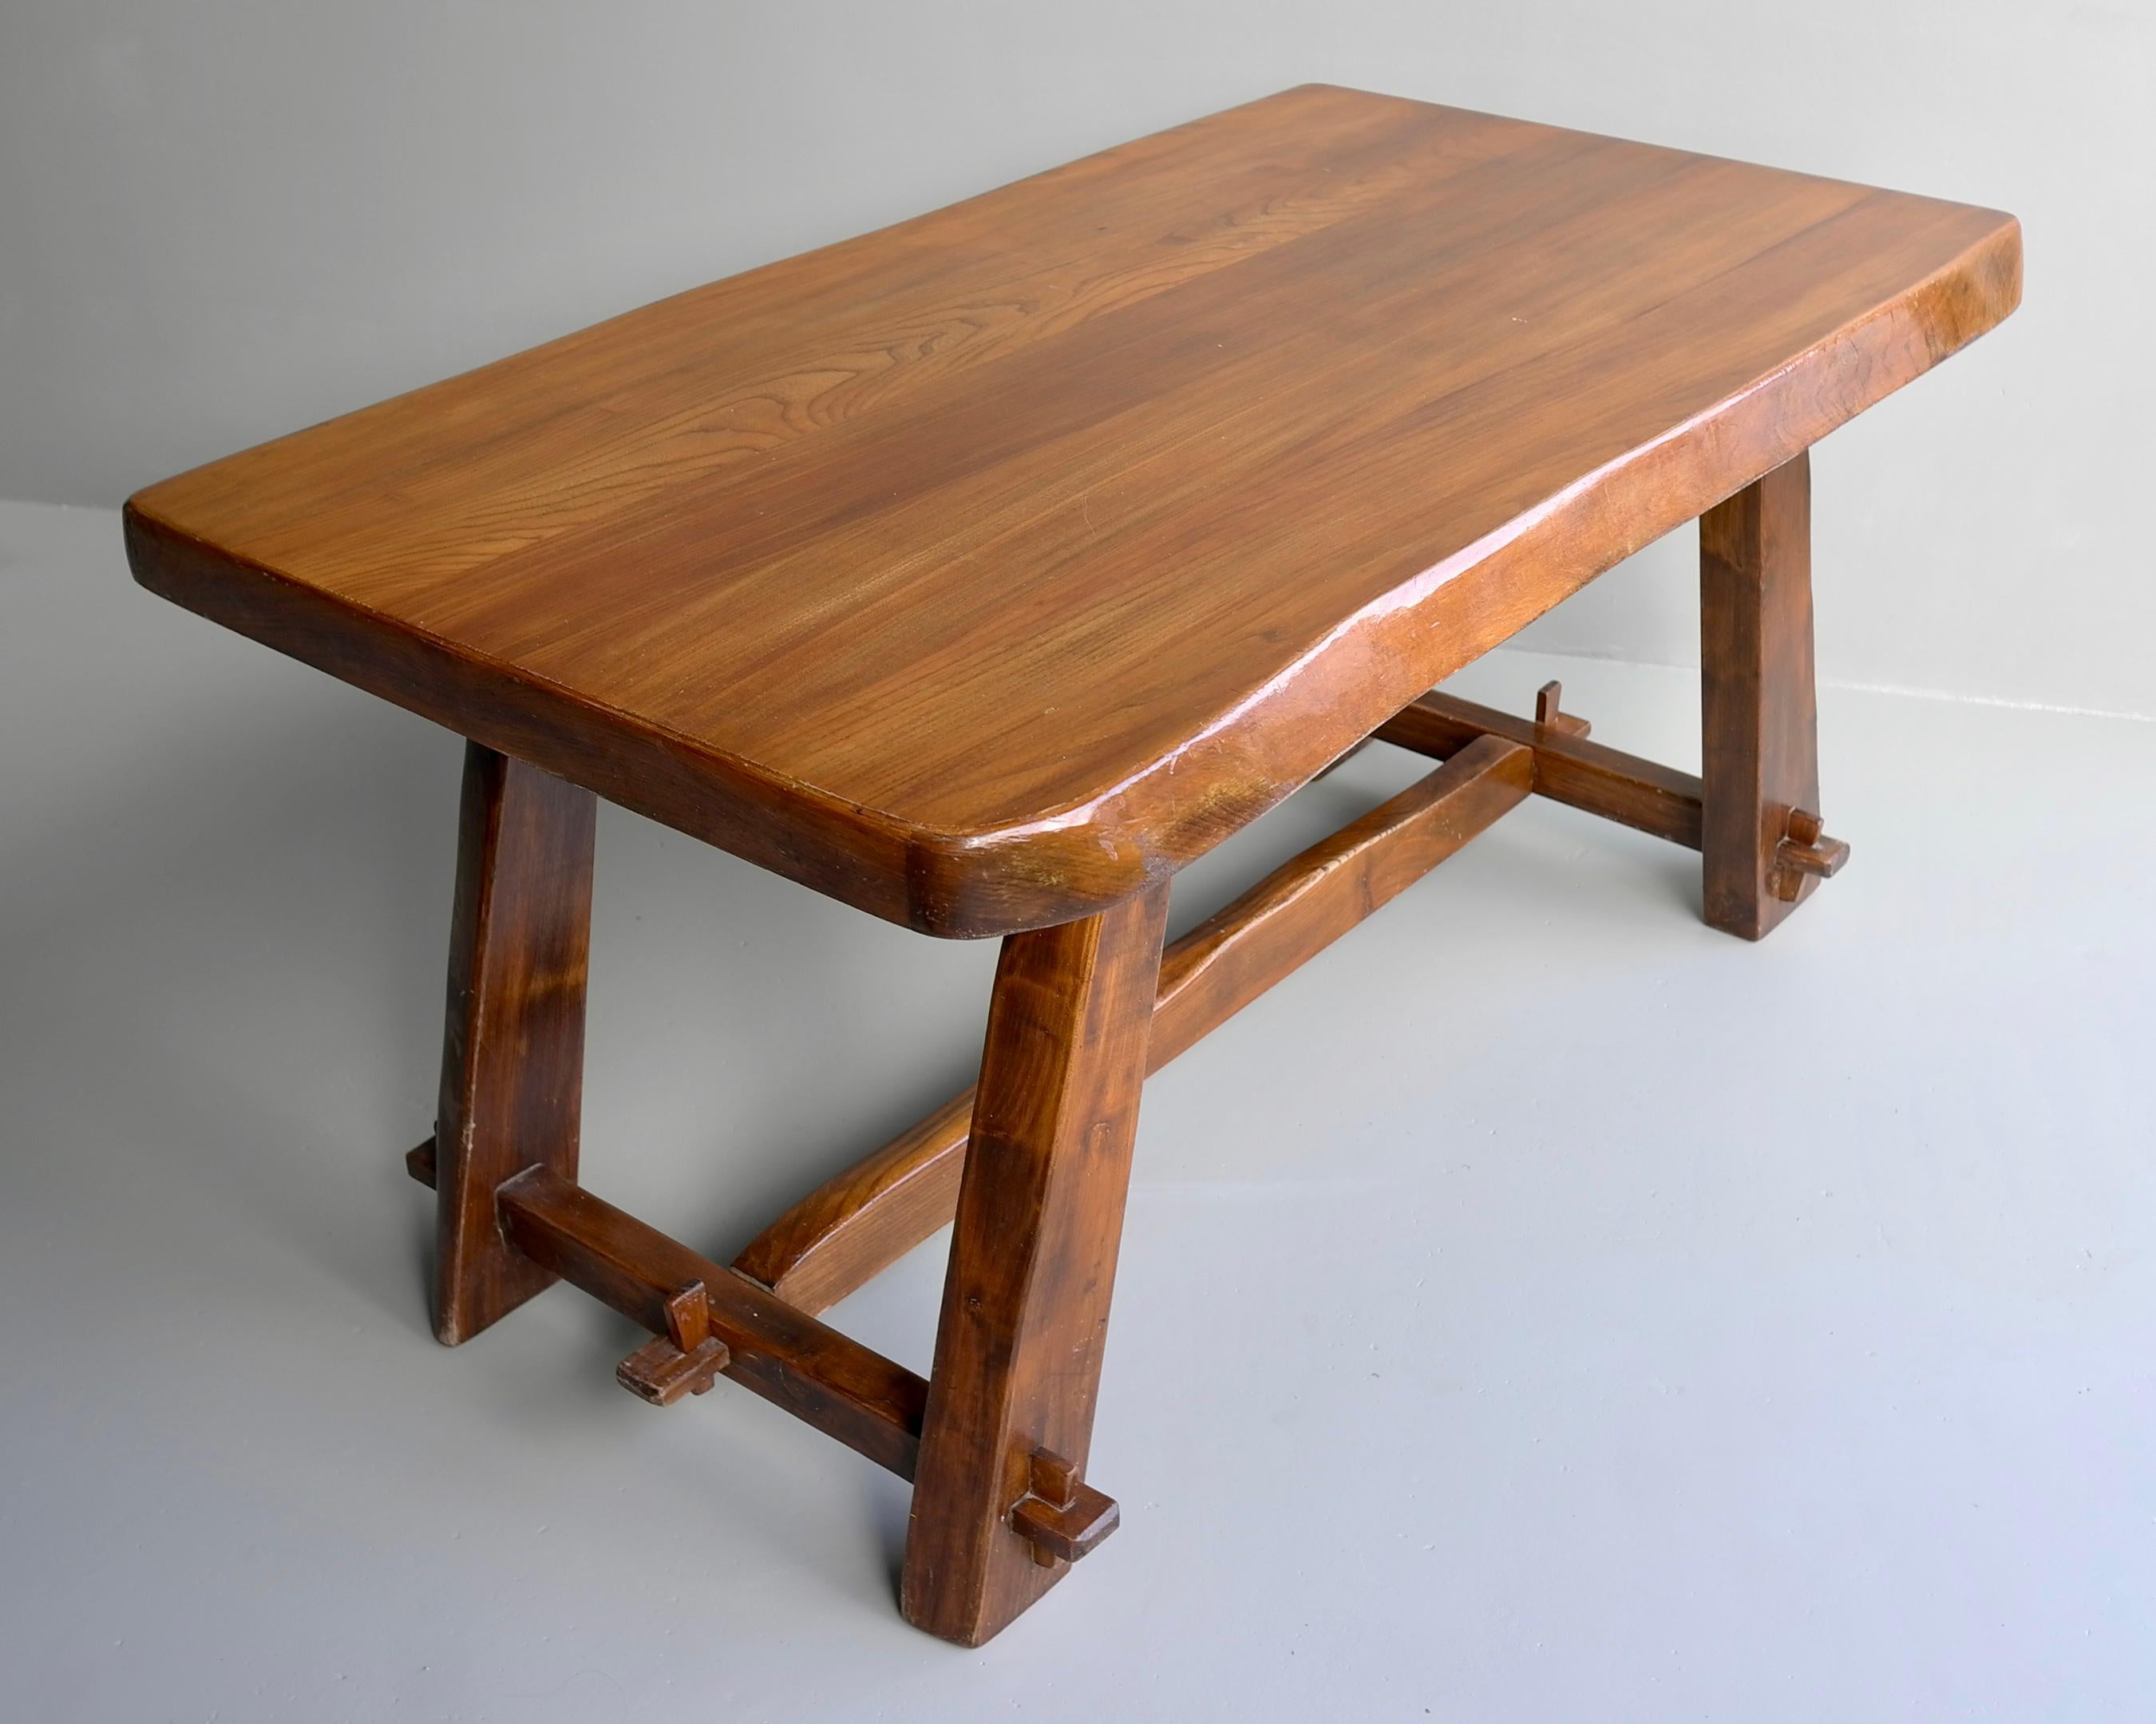 Organic Elmwood Dining Room Table by Aranjou, France 1960's For Sale 2